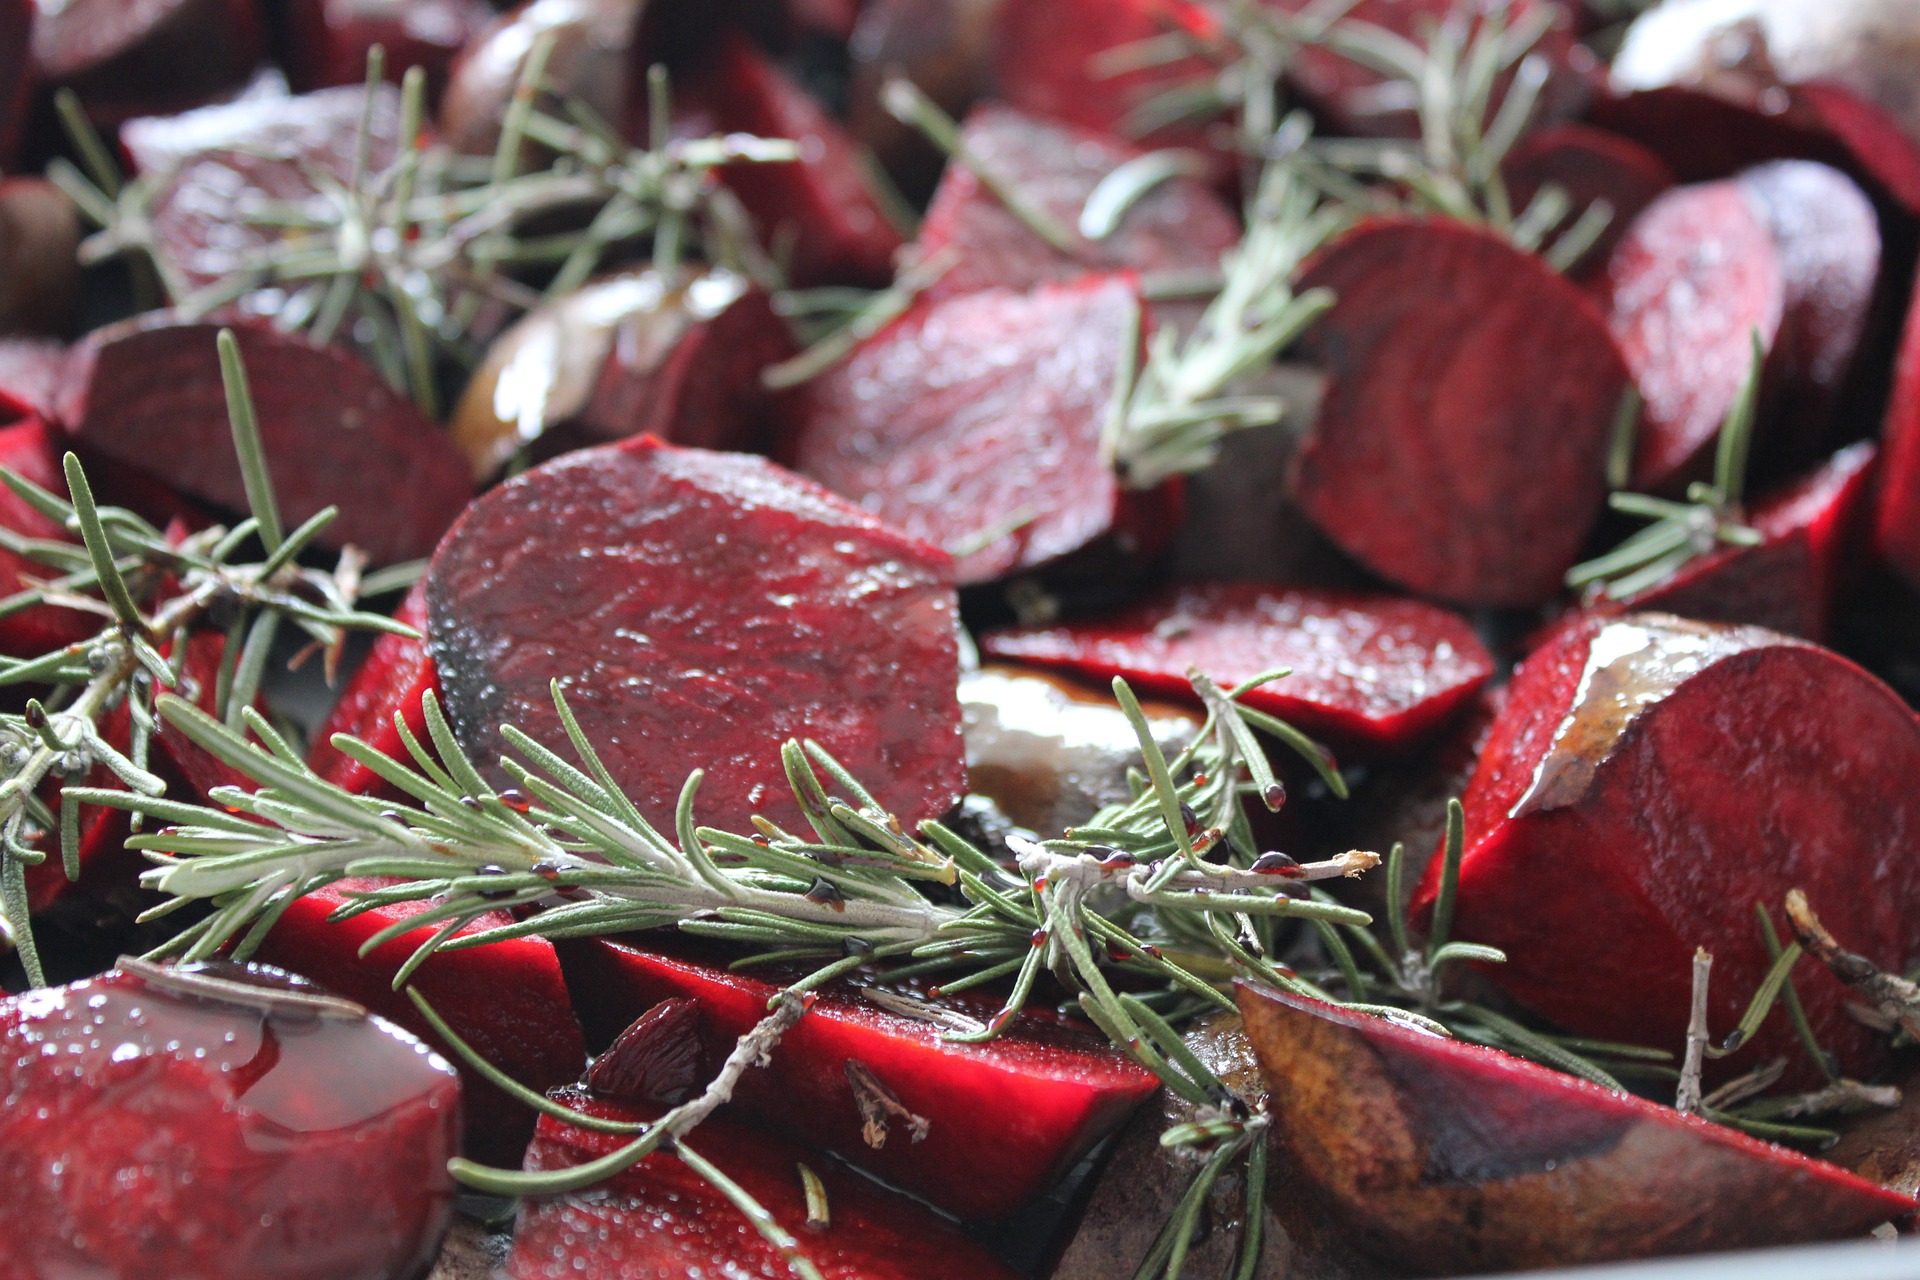 RED BEETROOT EXTRACT